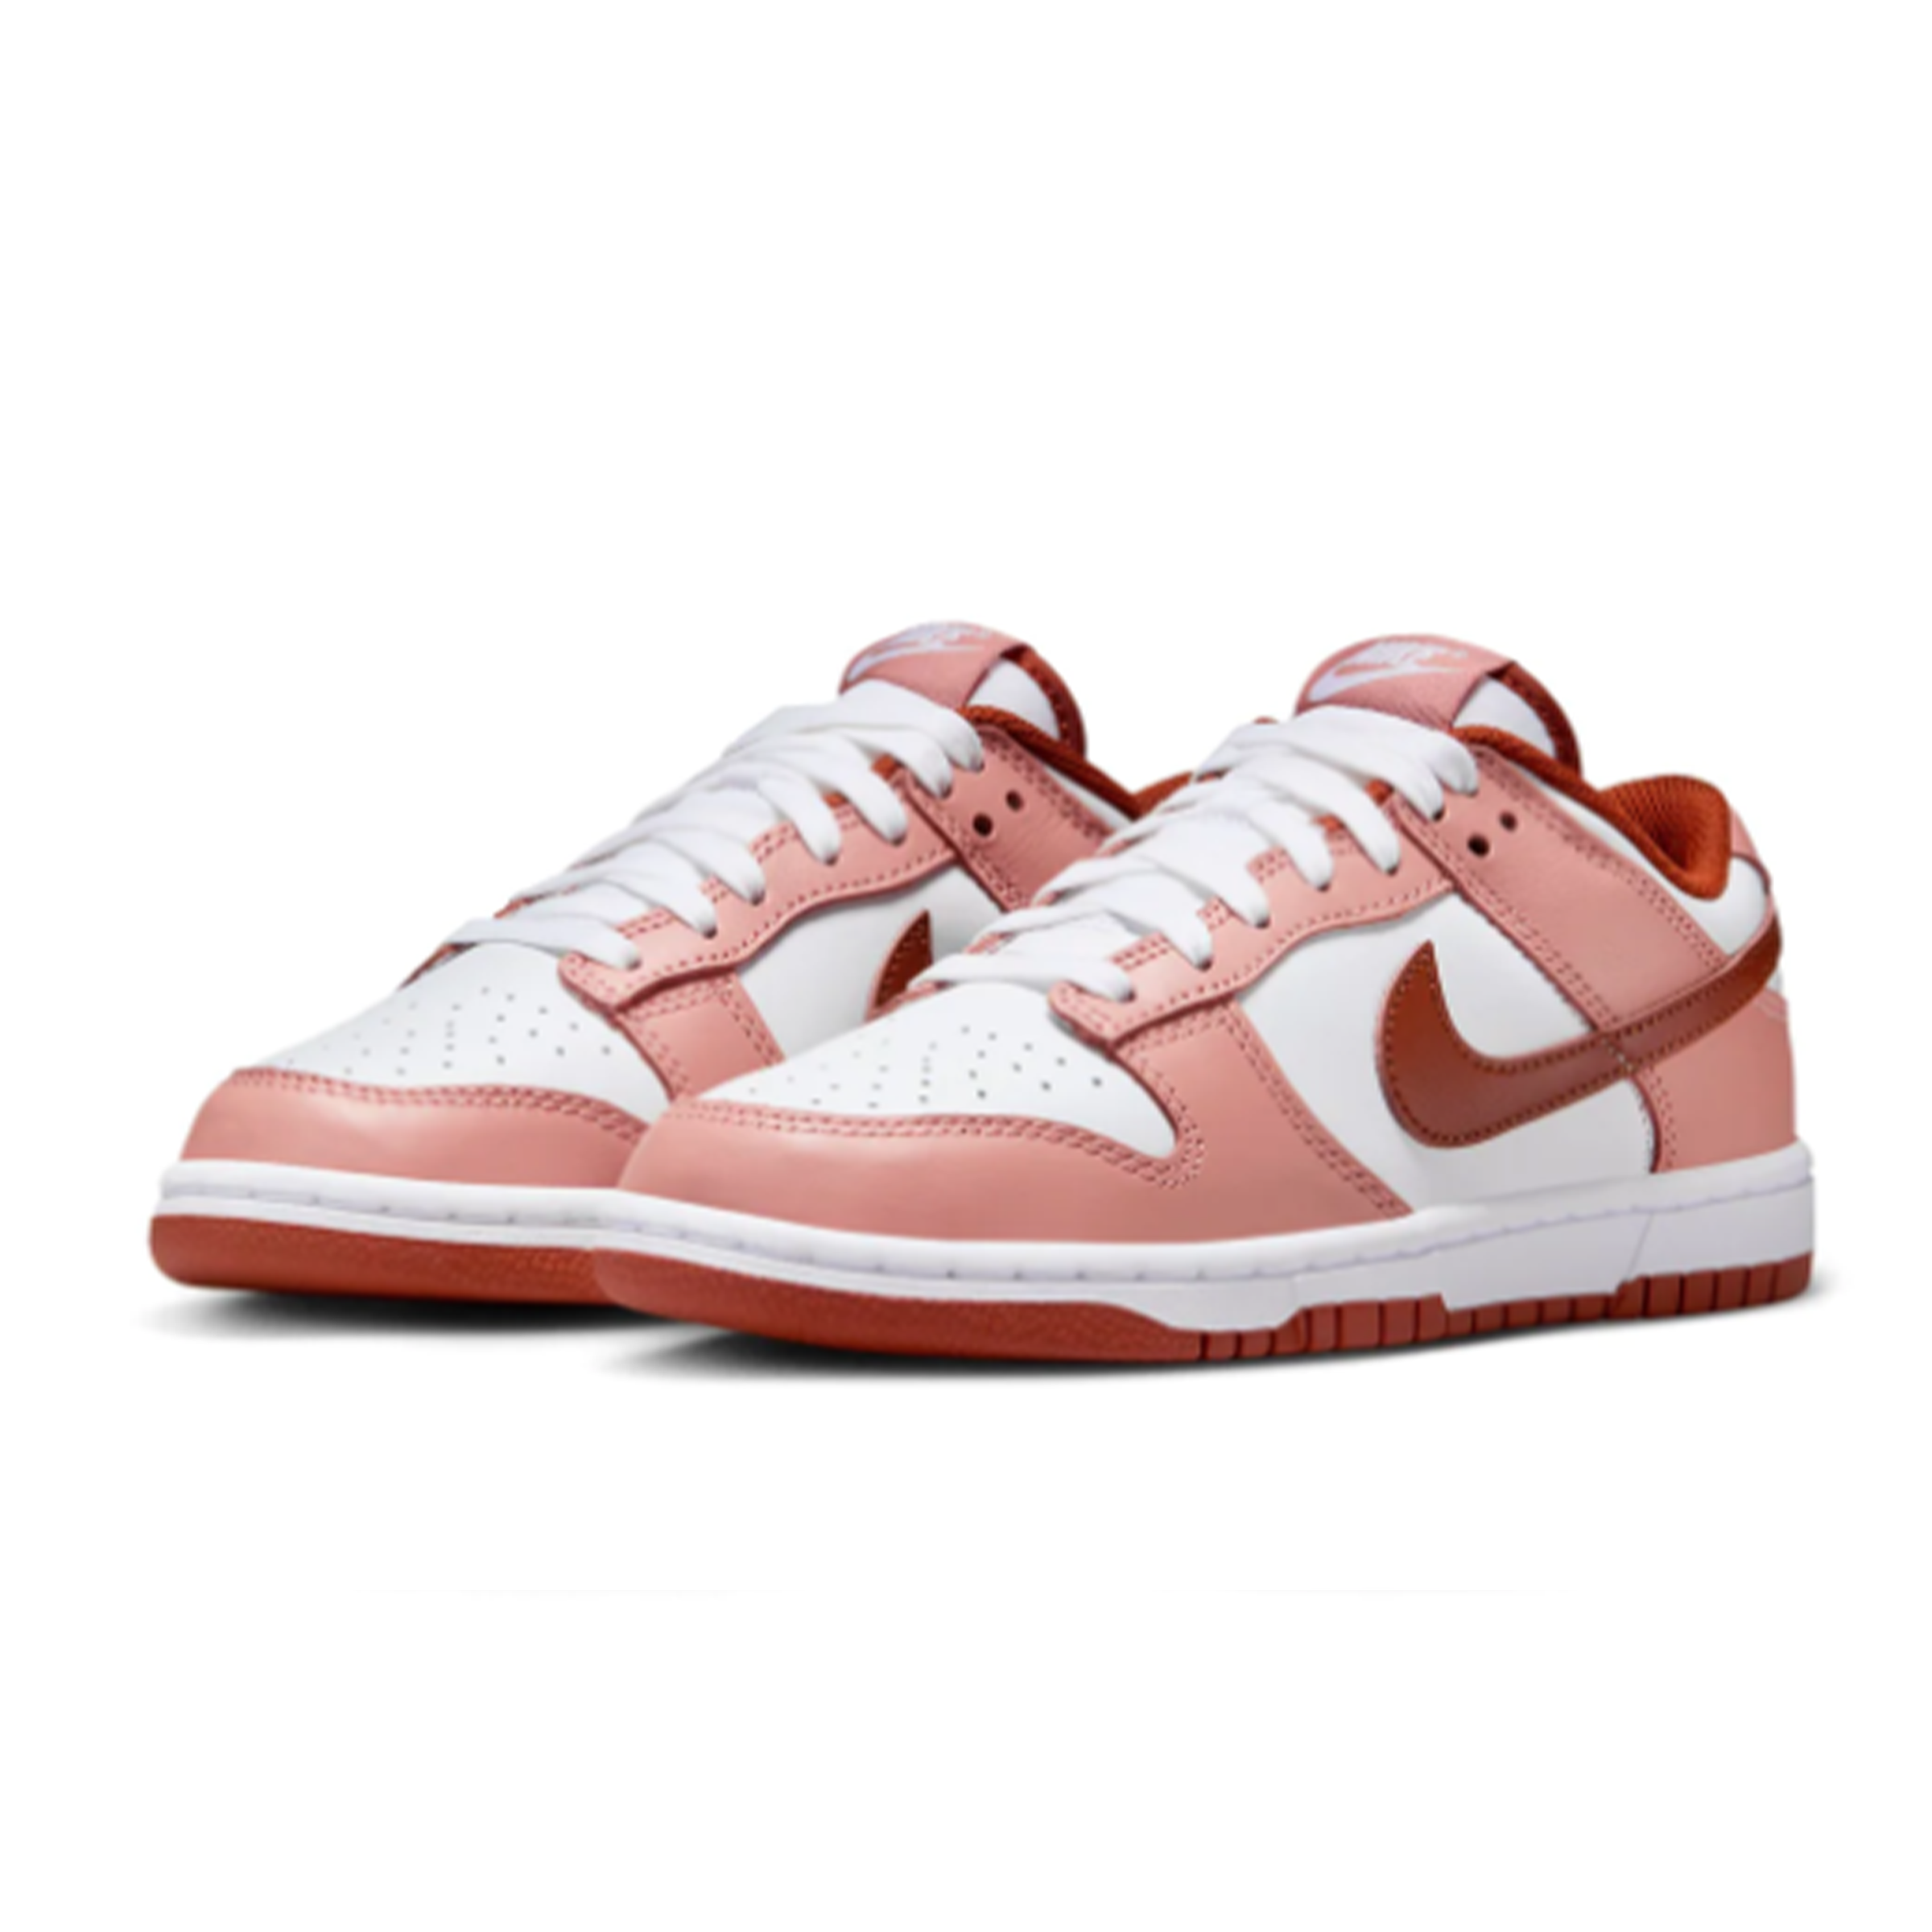 Nike Dunk Low (WMNS) - "Red Stardust"